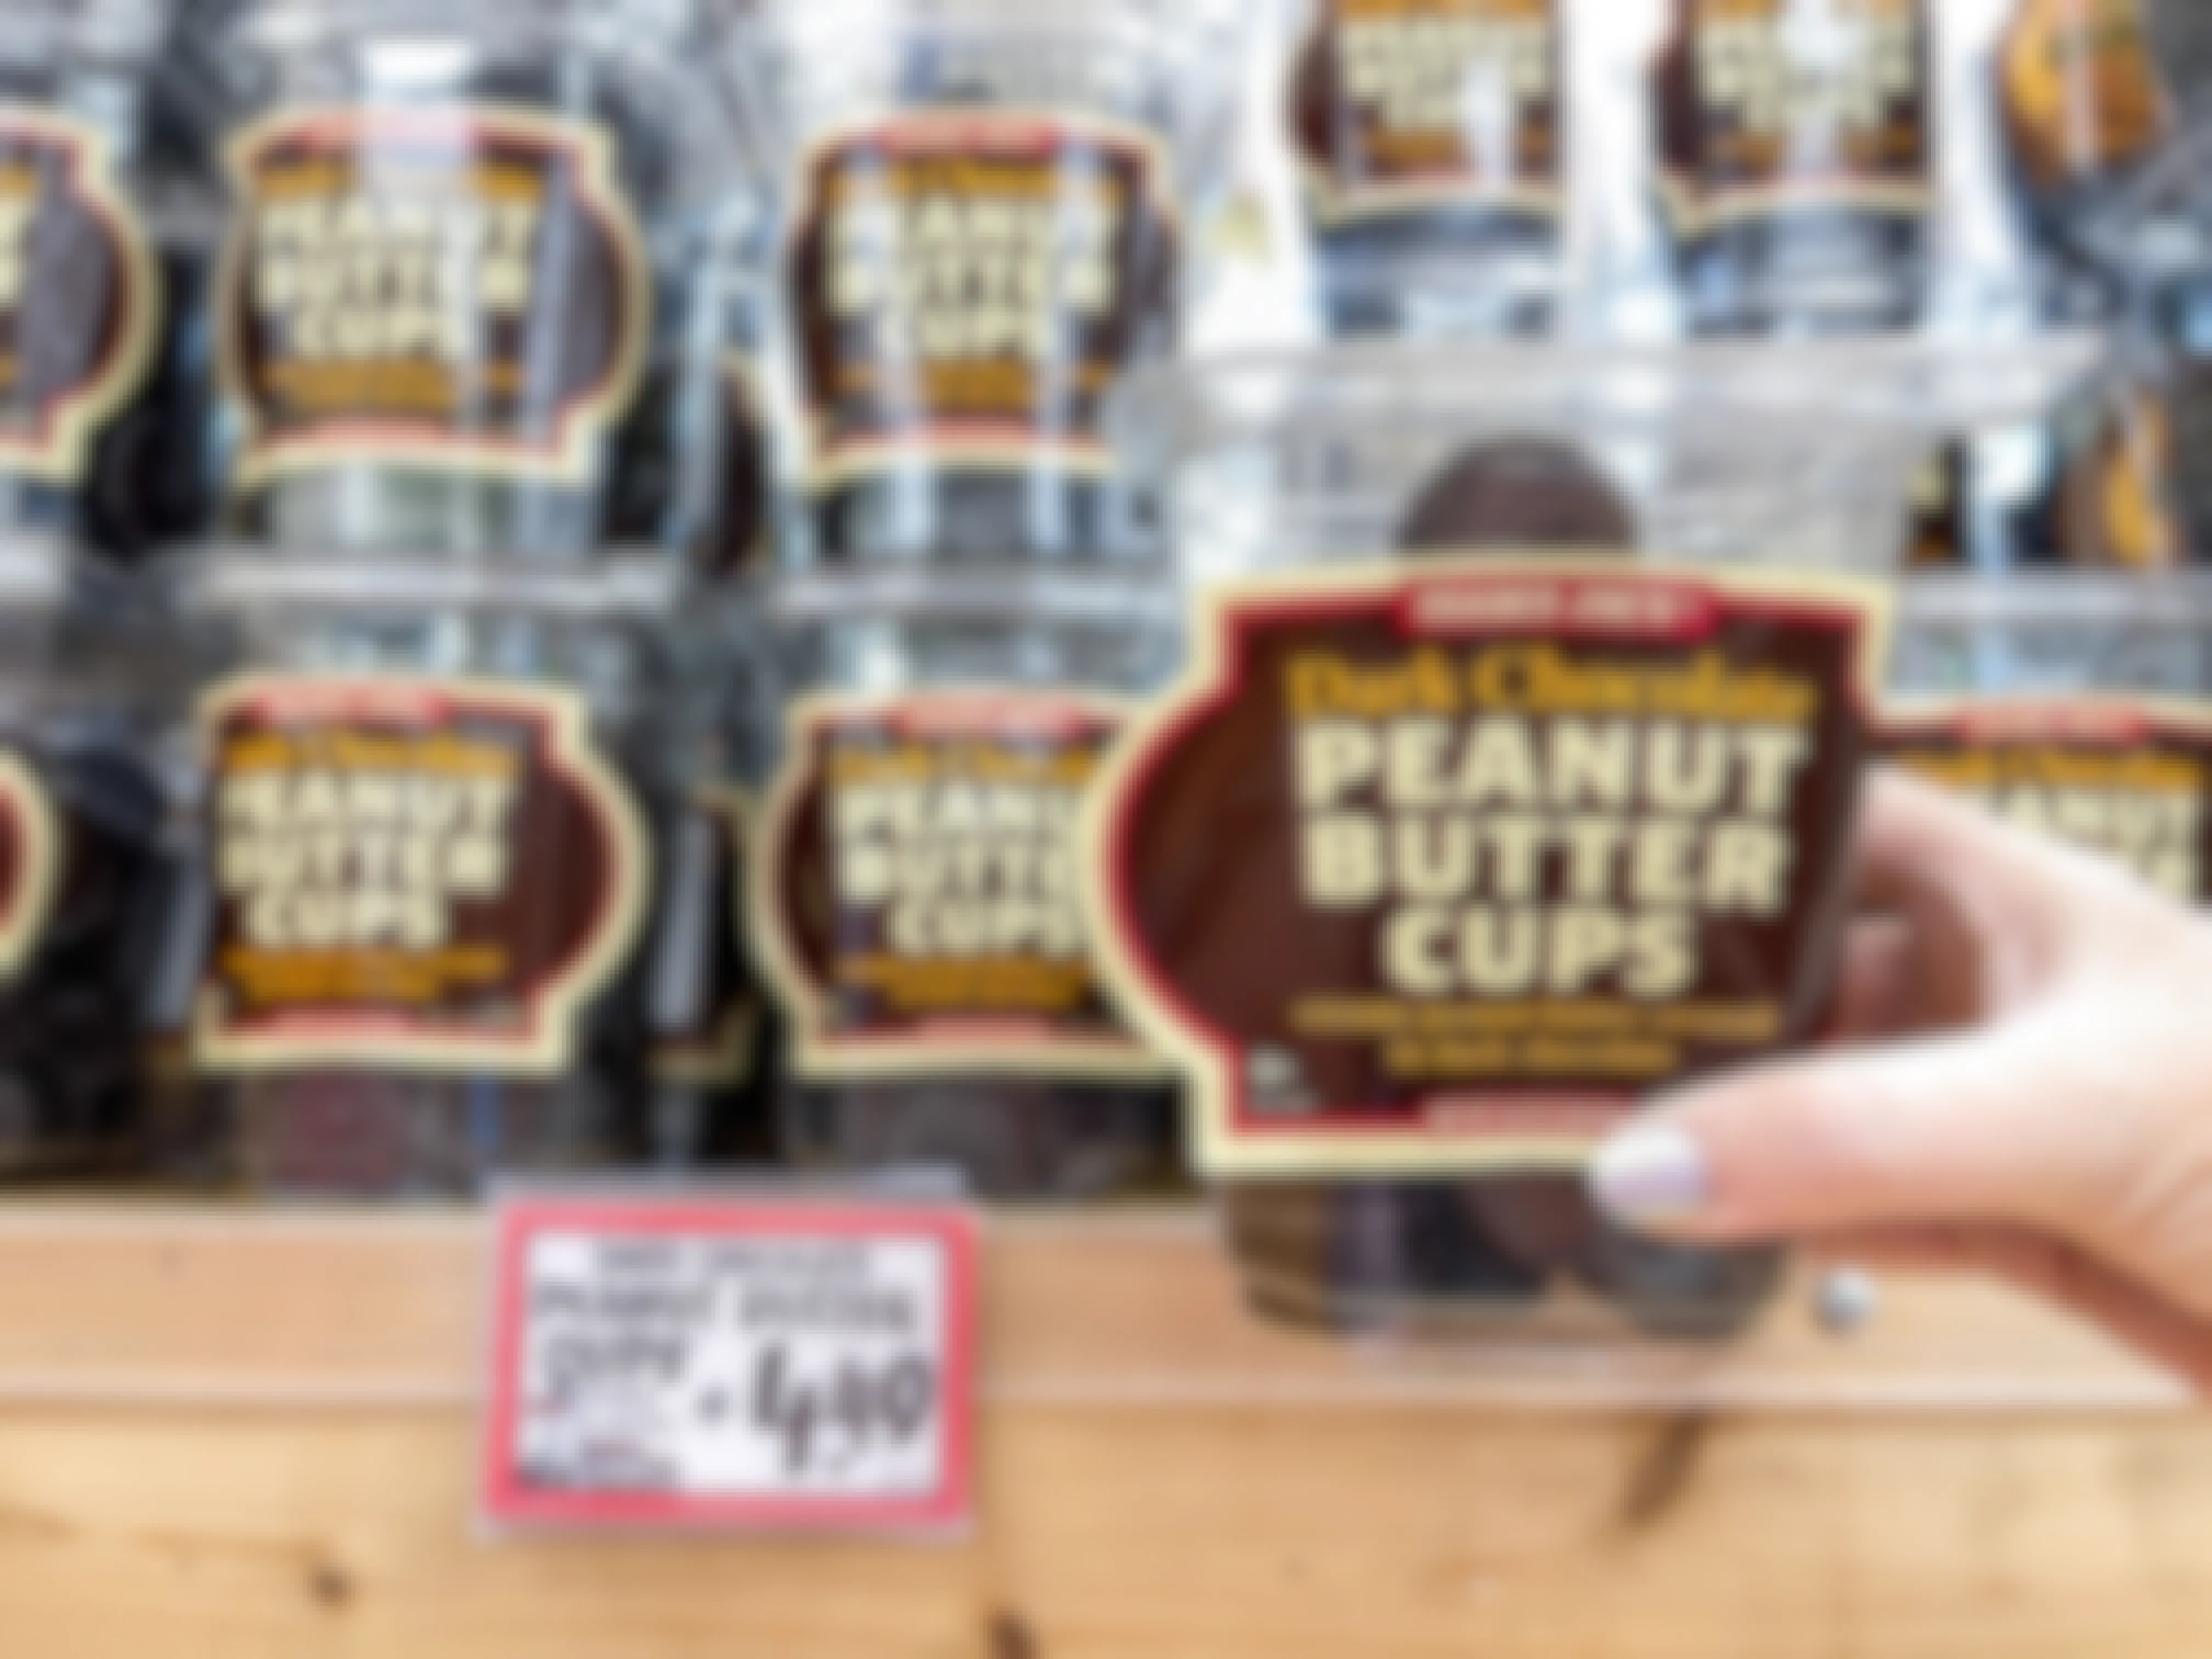 A person's hand holding a cup of Trader Joe's Dark Chocolate Peanut Butter Cups in front of a display of them on a shelf at Trader Joe's.